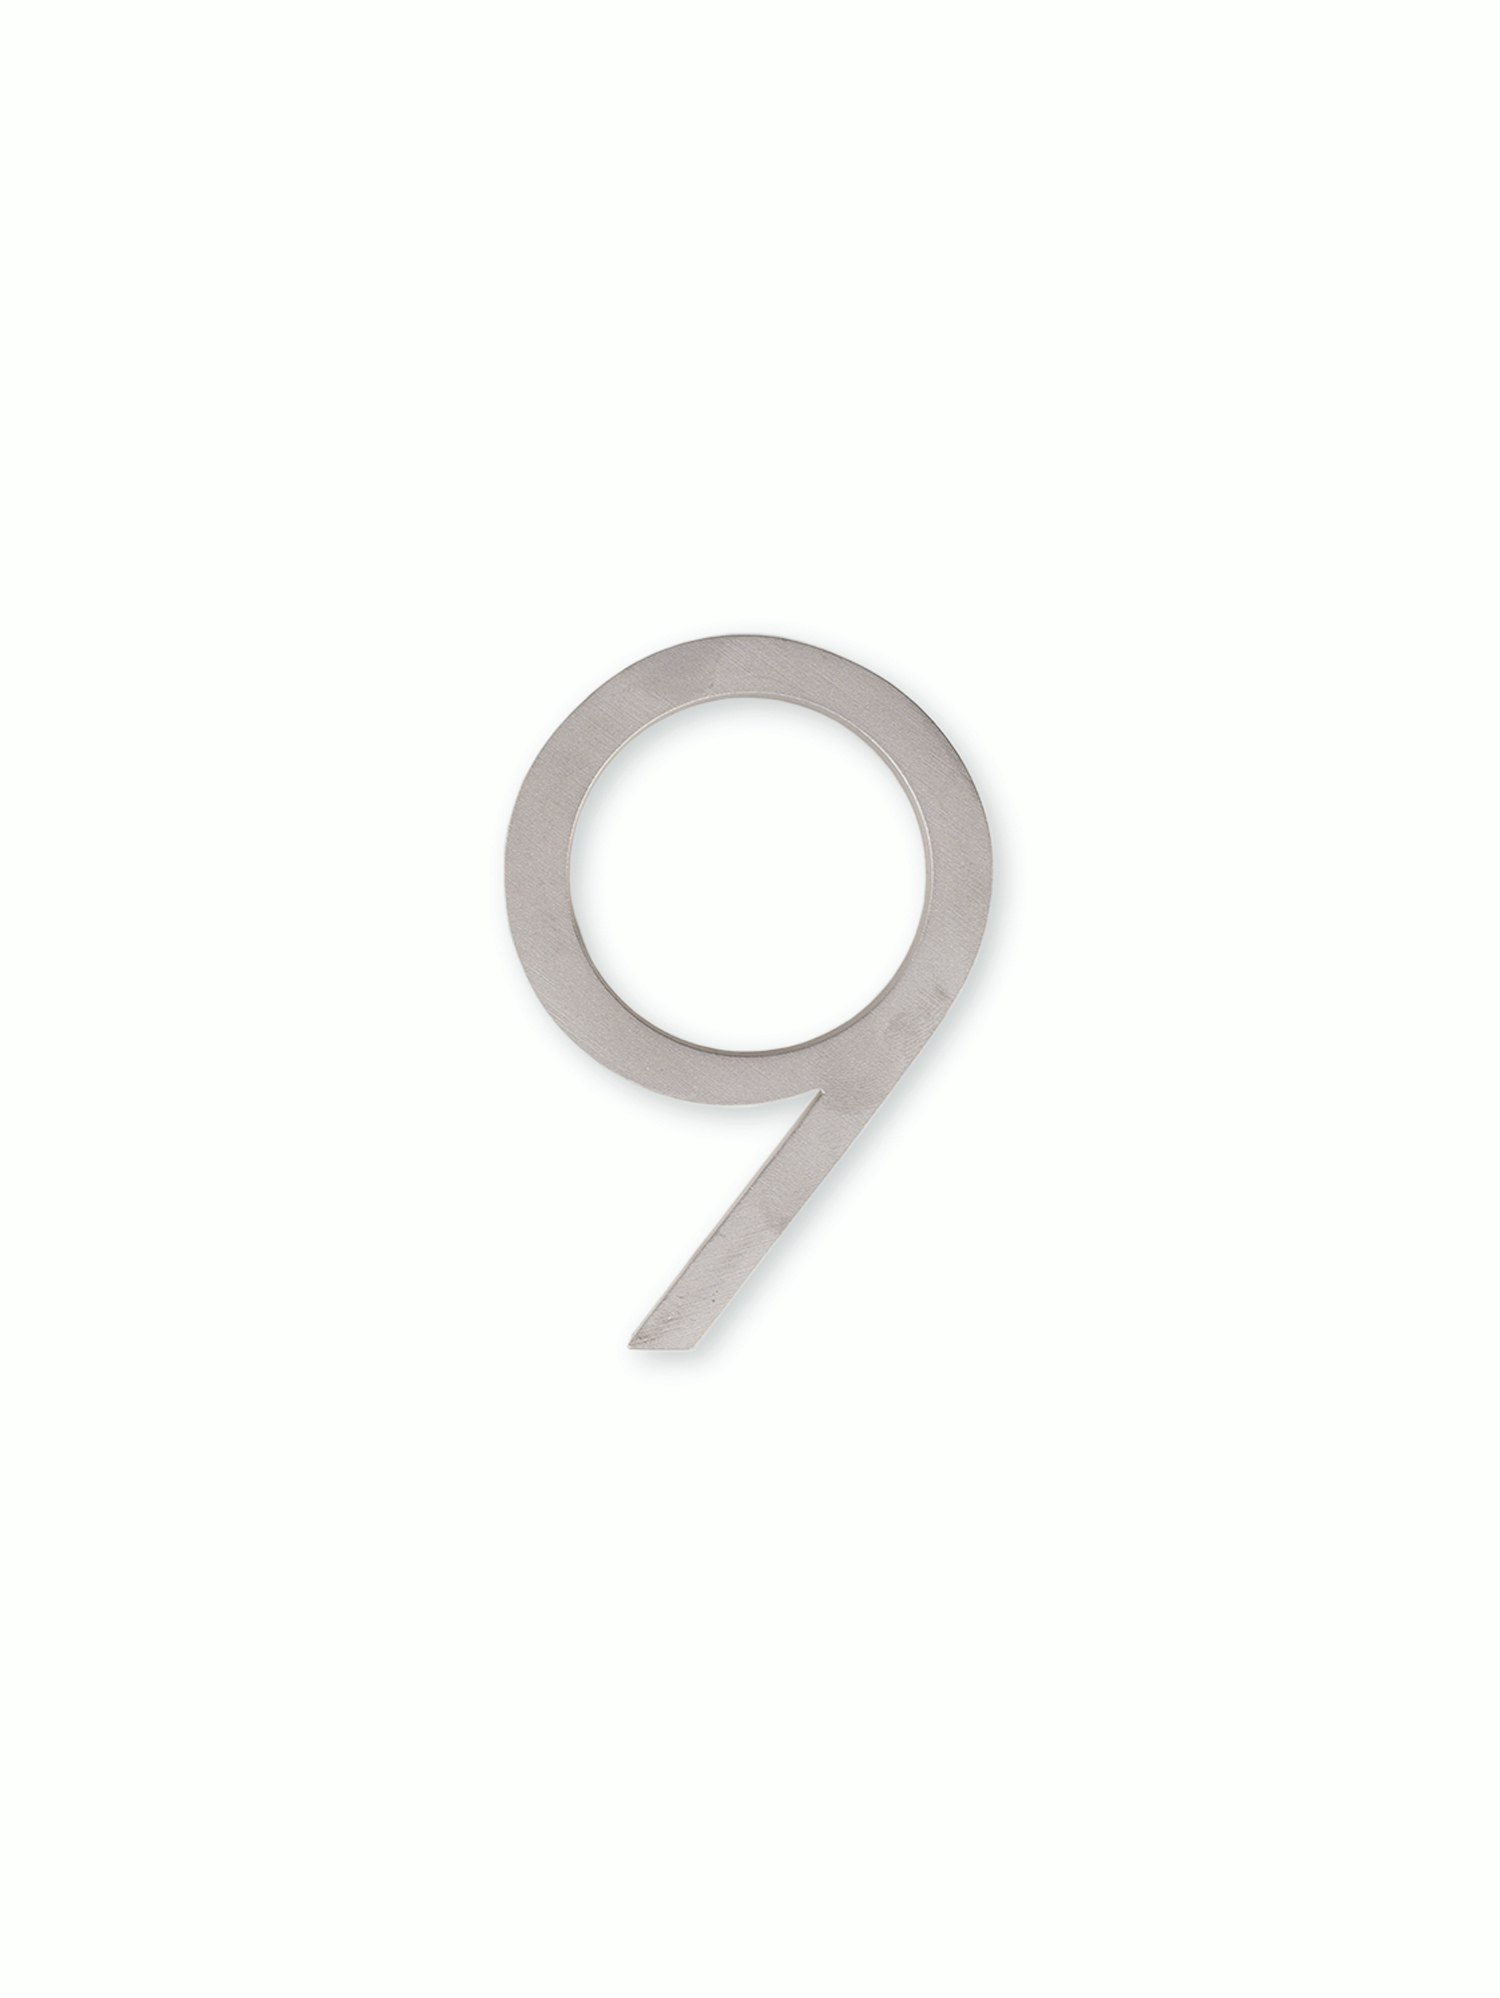 Floating Finish House Numbers Century Font Details about   Mocha Matt Listing is for 1 No 